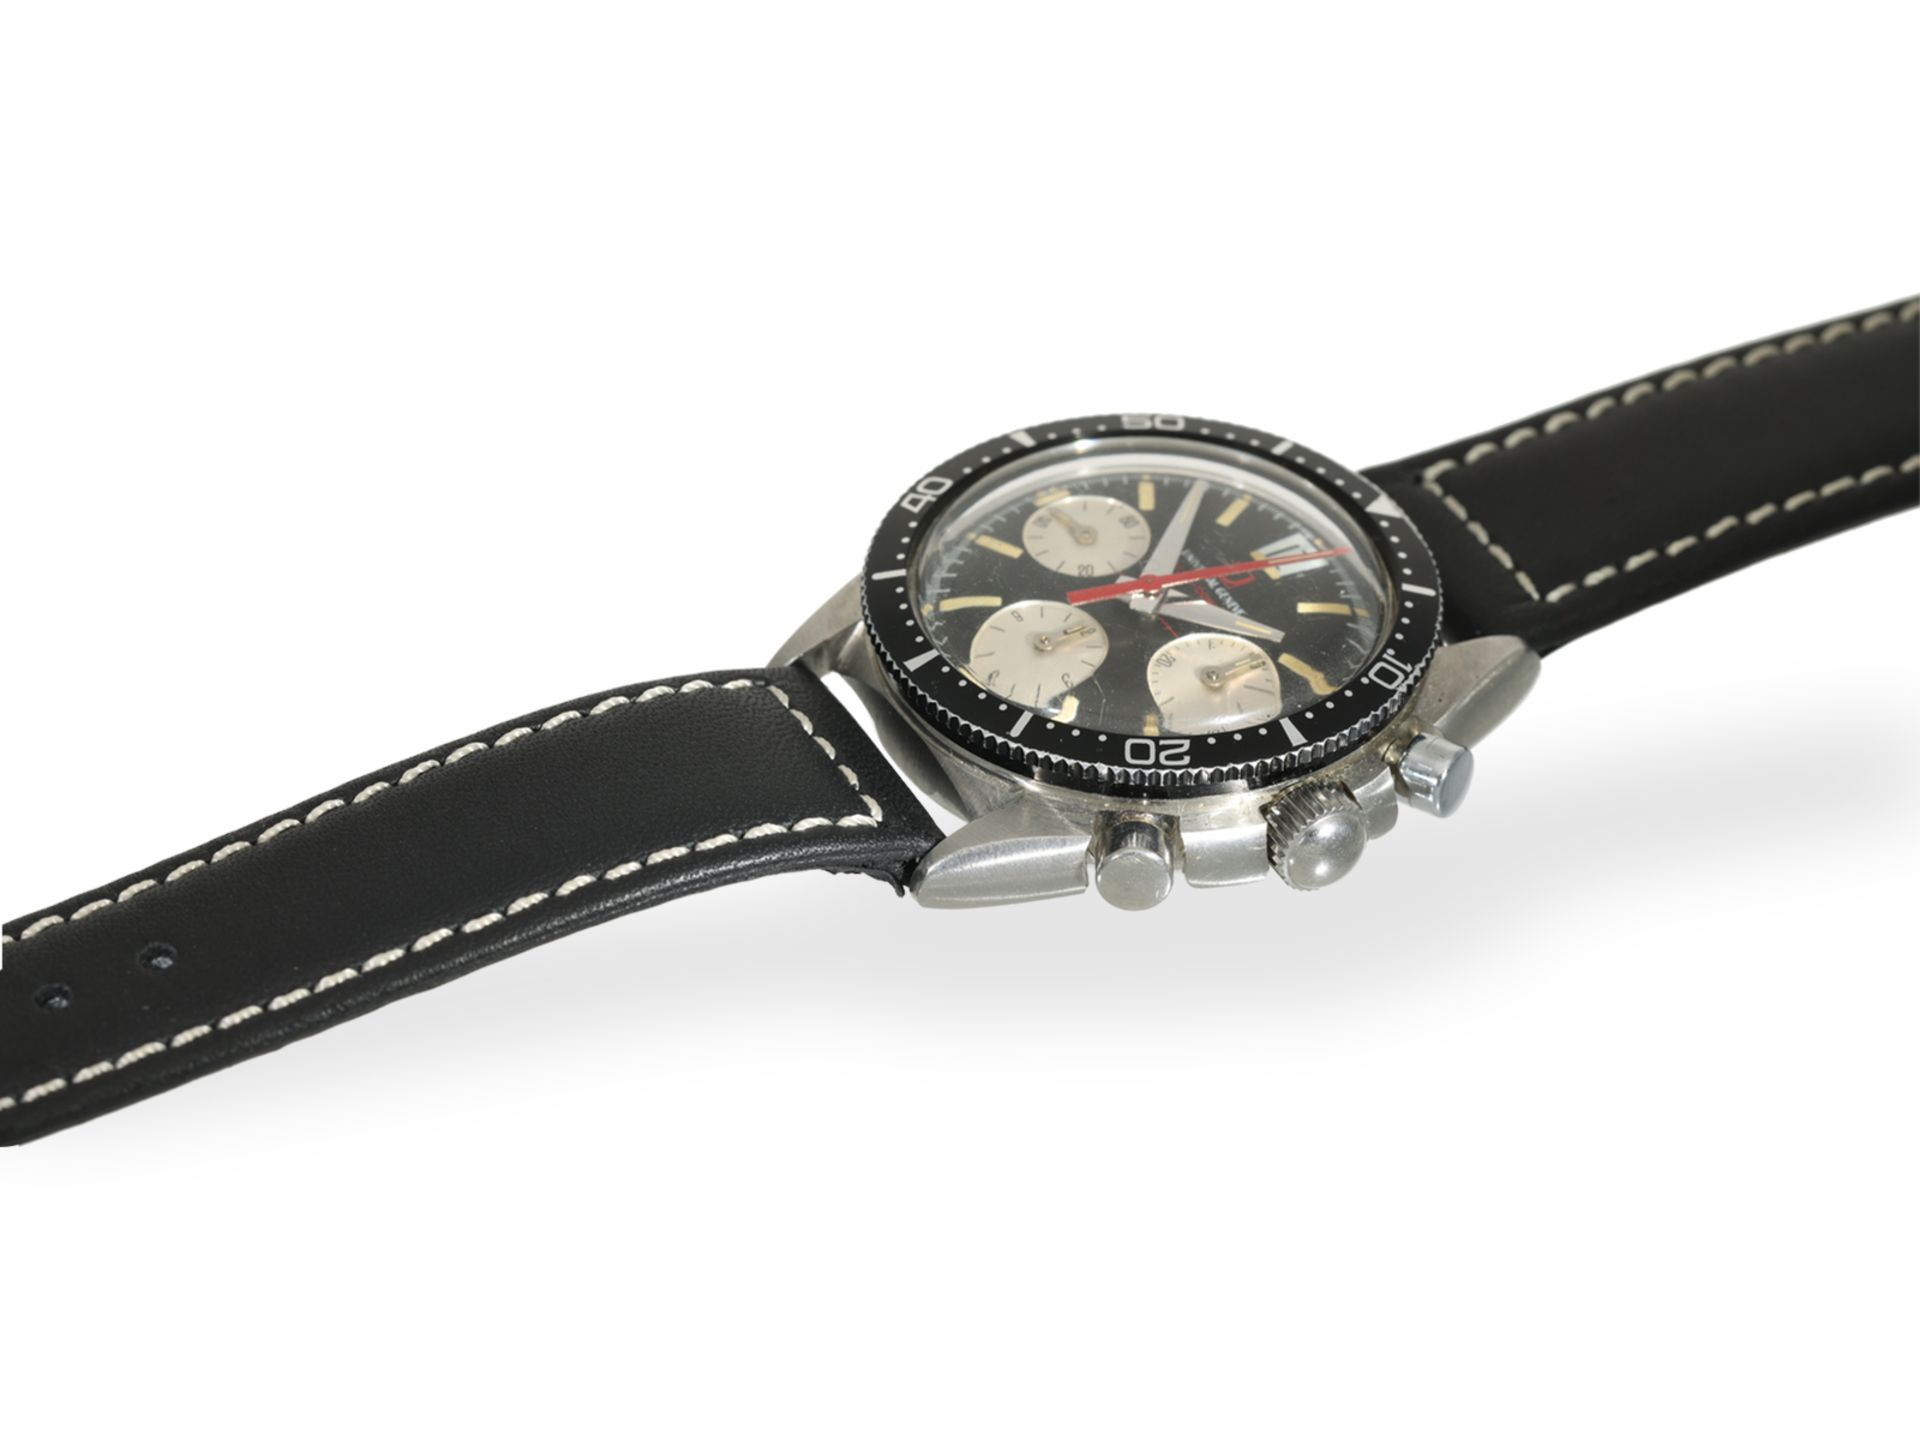 Wristwatch: vintage Sport Chronograph Universal Geneve Space Compax REF 885104/01, ca. 1970 - Image 5 of 6